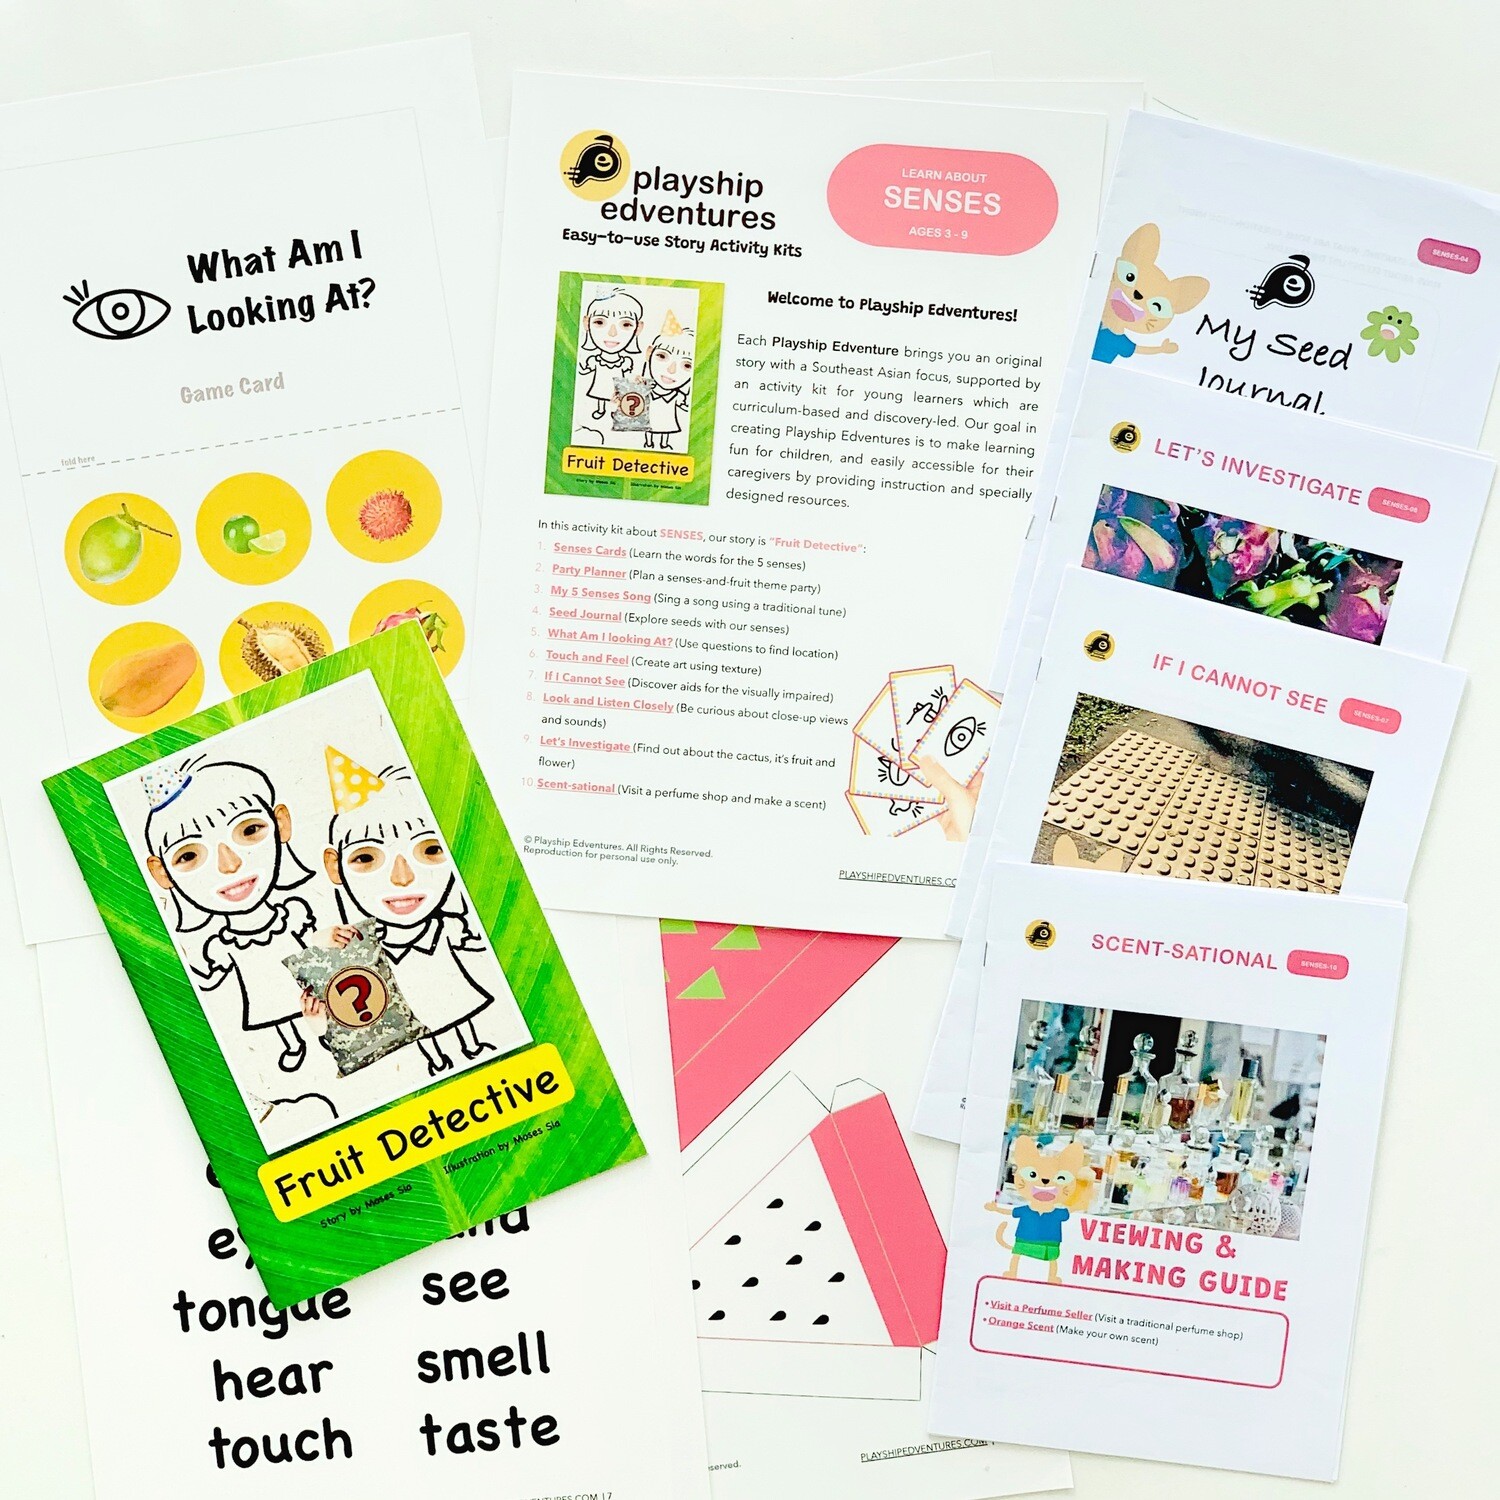 "Fruit Detective" 
Story Activity Kit (PRINTED)